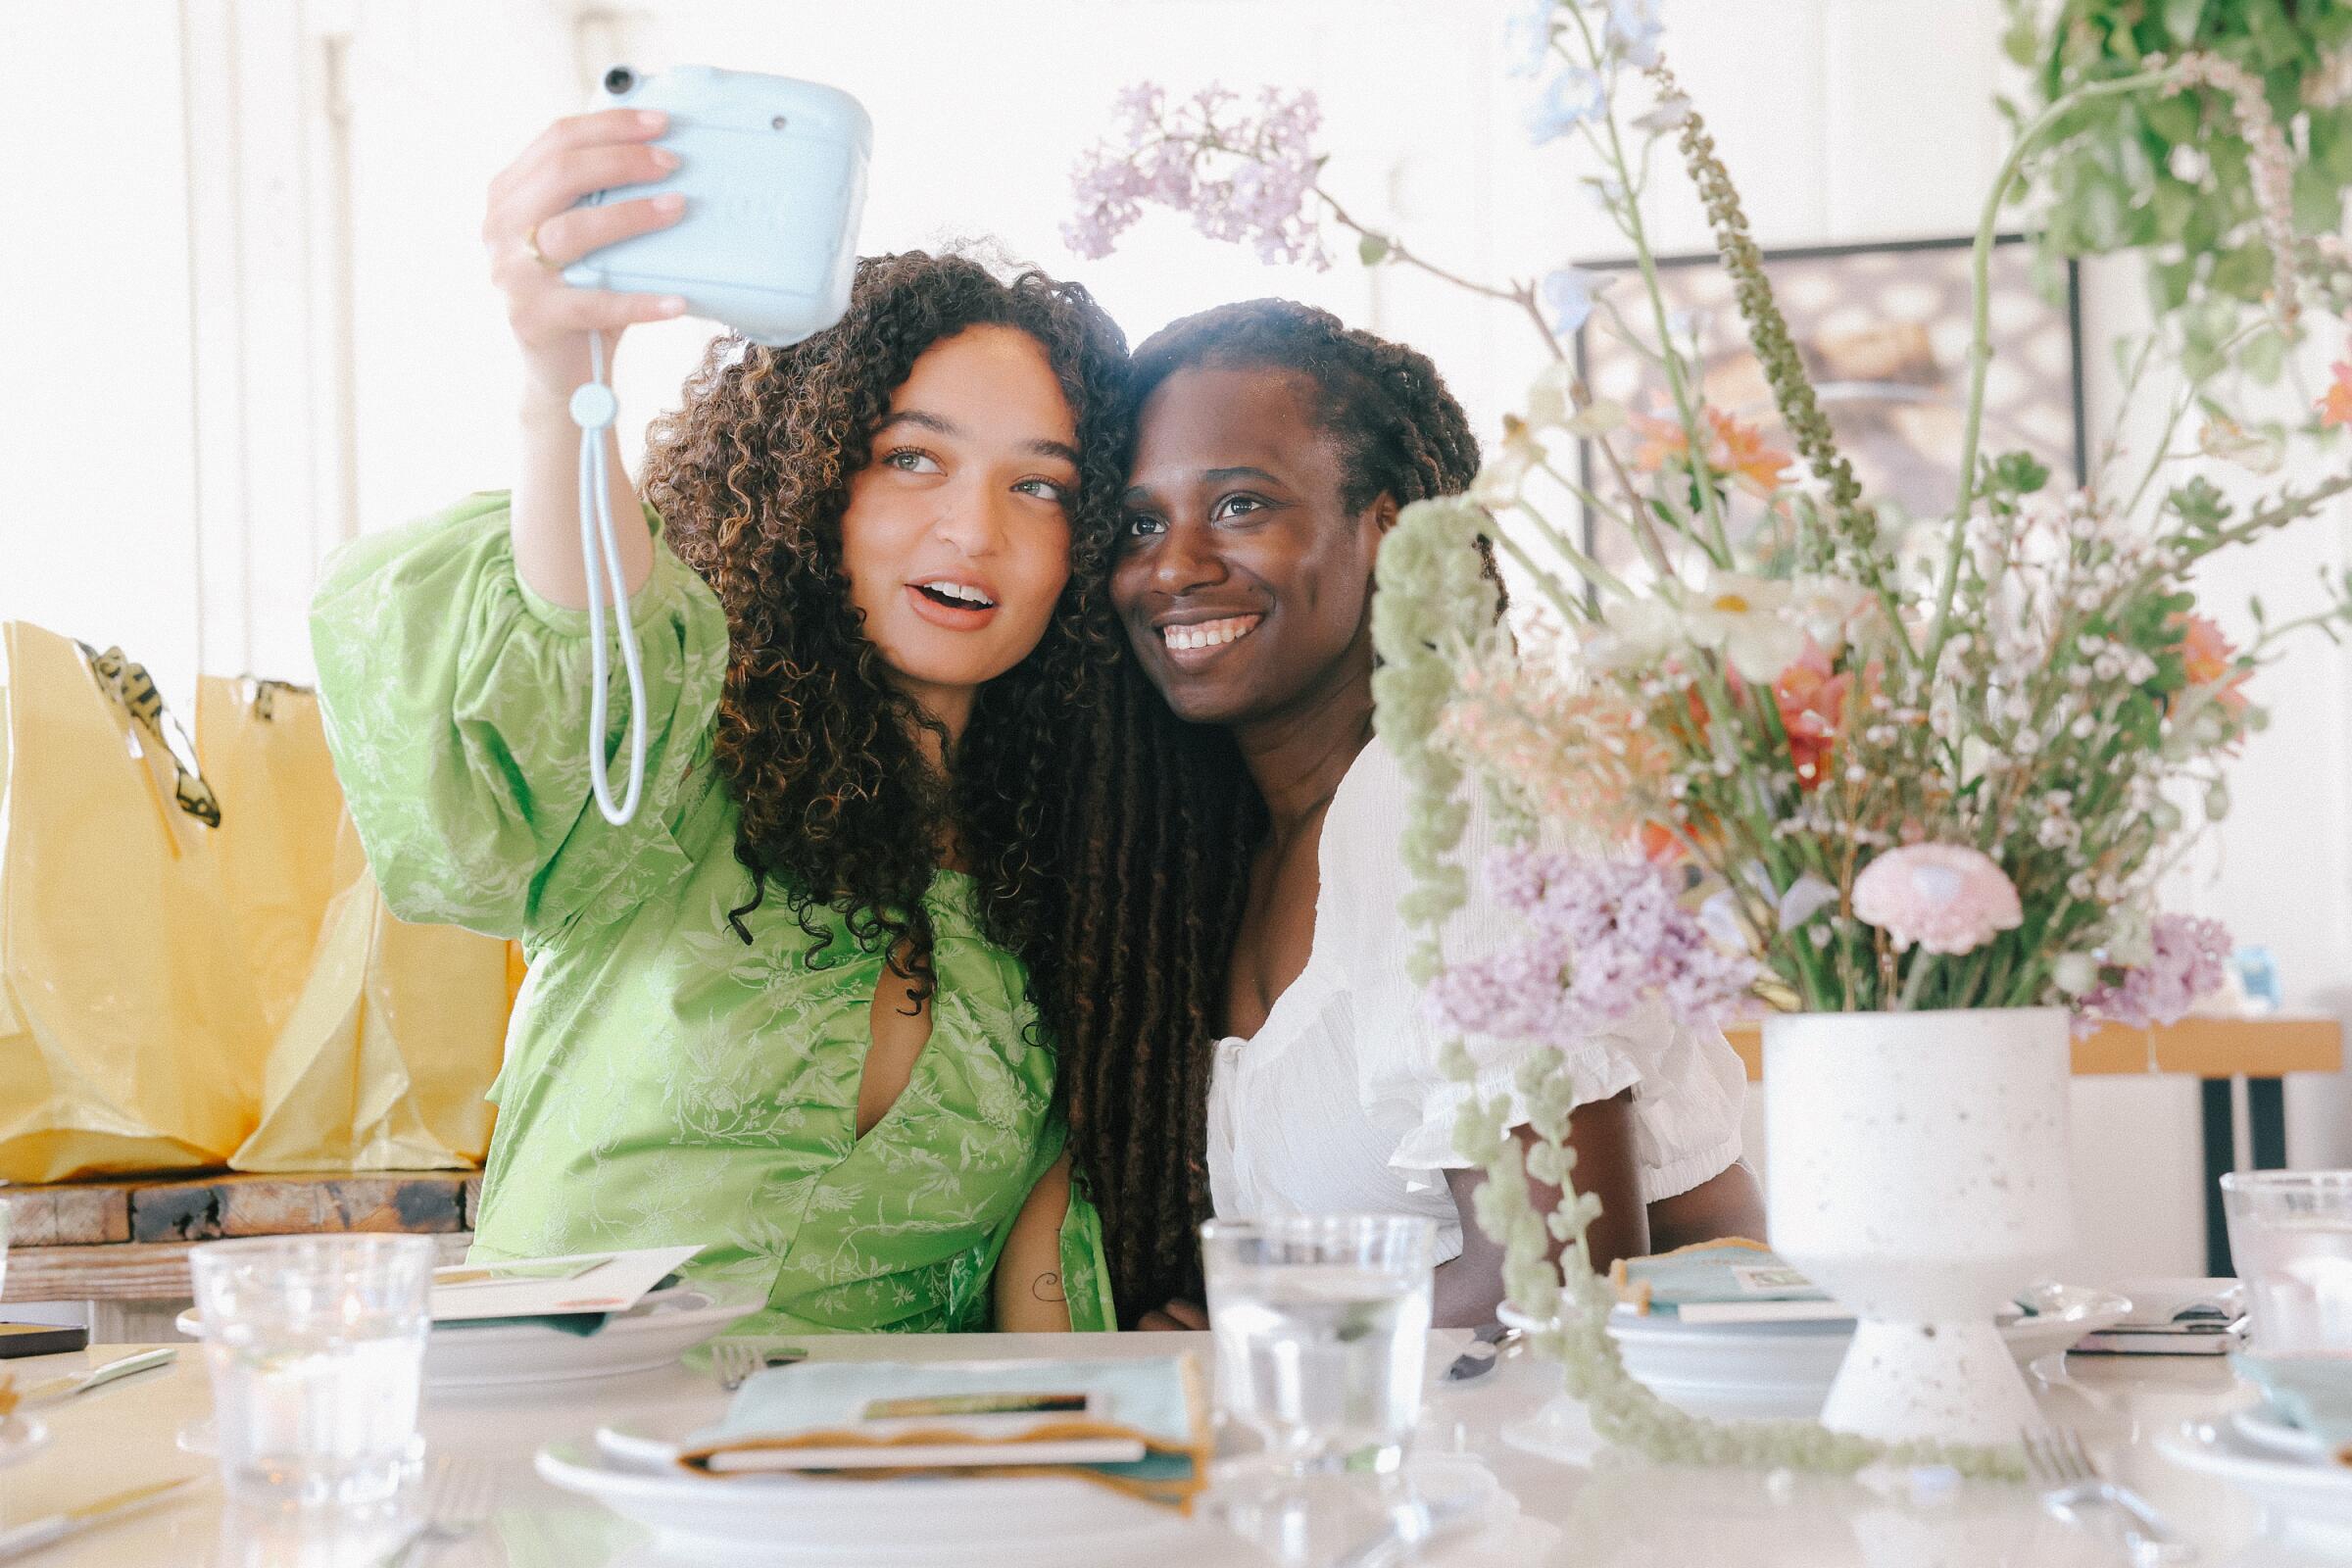 Two women take a selfie on an instant camera next to a vase of flowers.